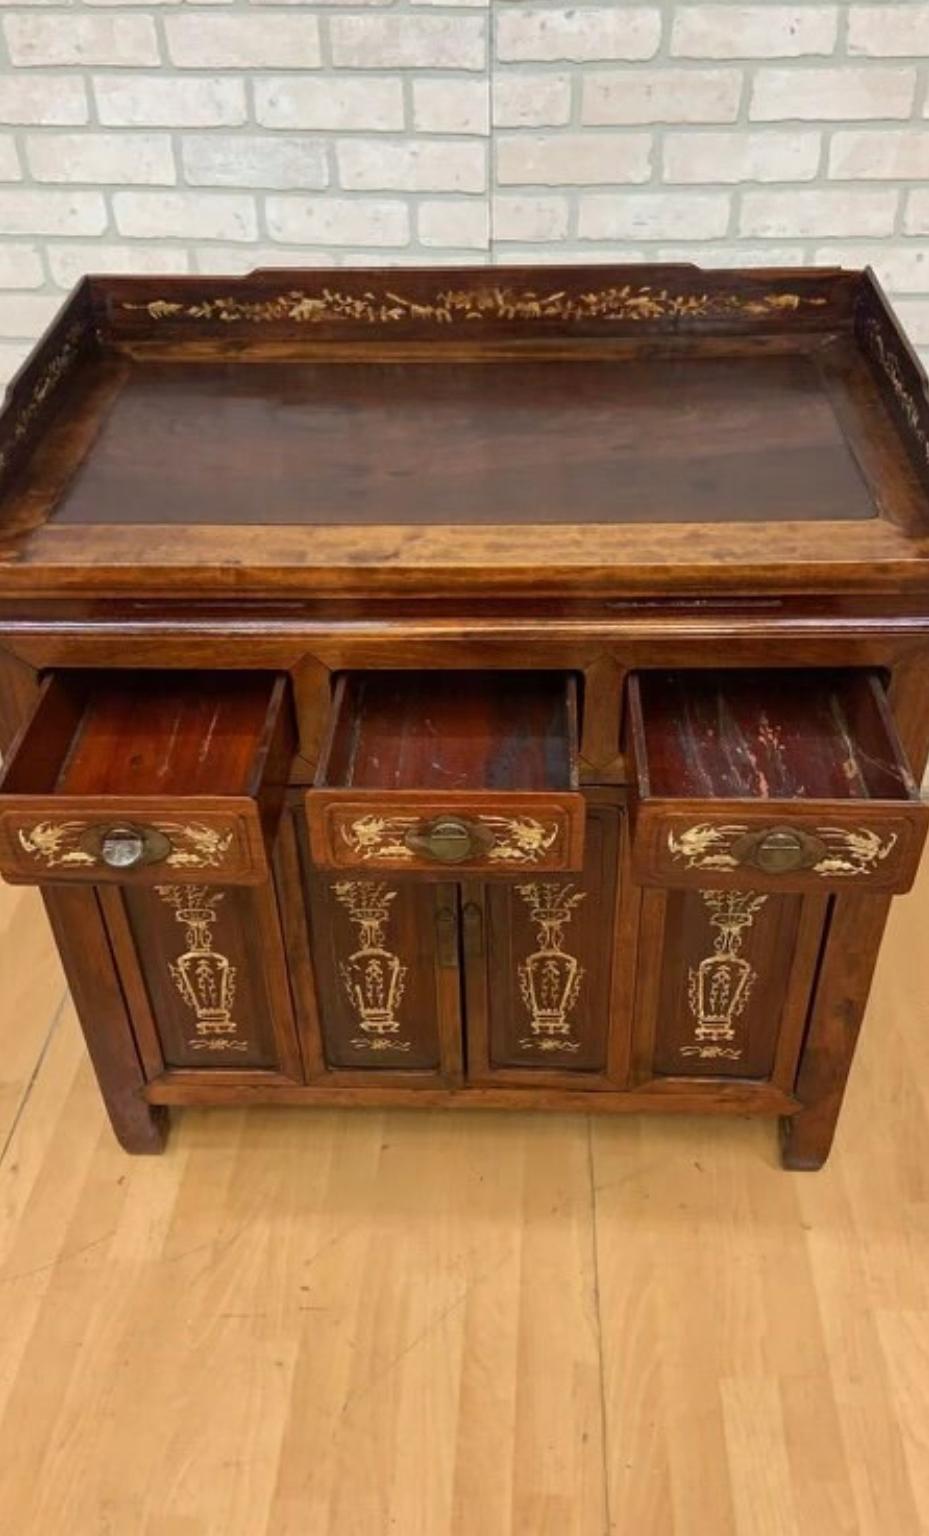 19th Century Antique Chinese Jiangsu Province Rosewood with Bone Inlay Sideboard Cabinet For Sale